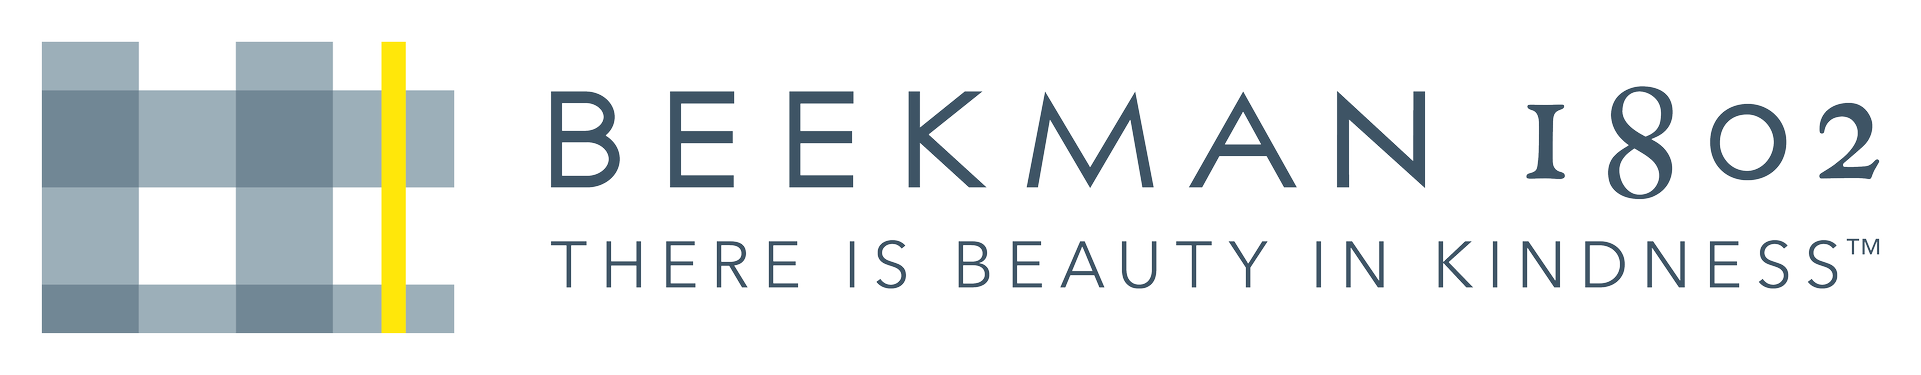 Beekman 1802 | There Is Beauty In Kindness